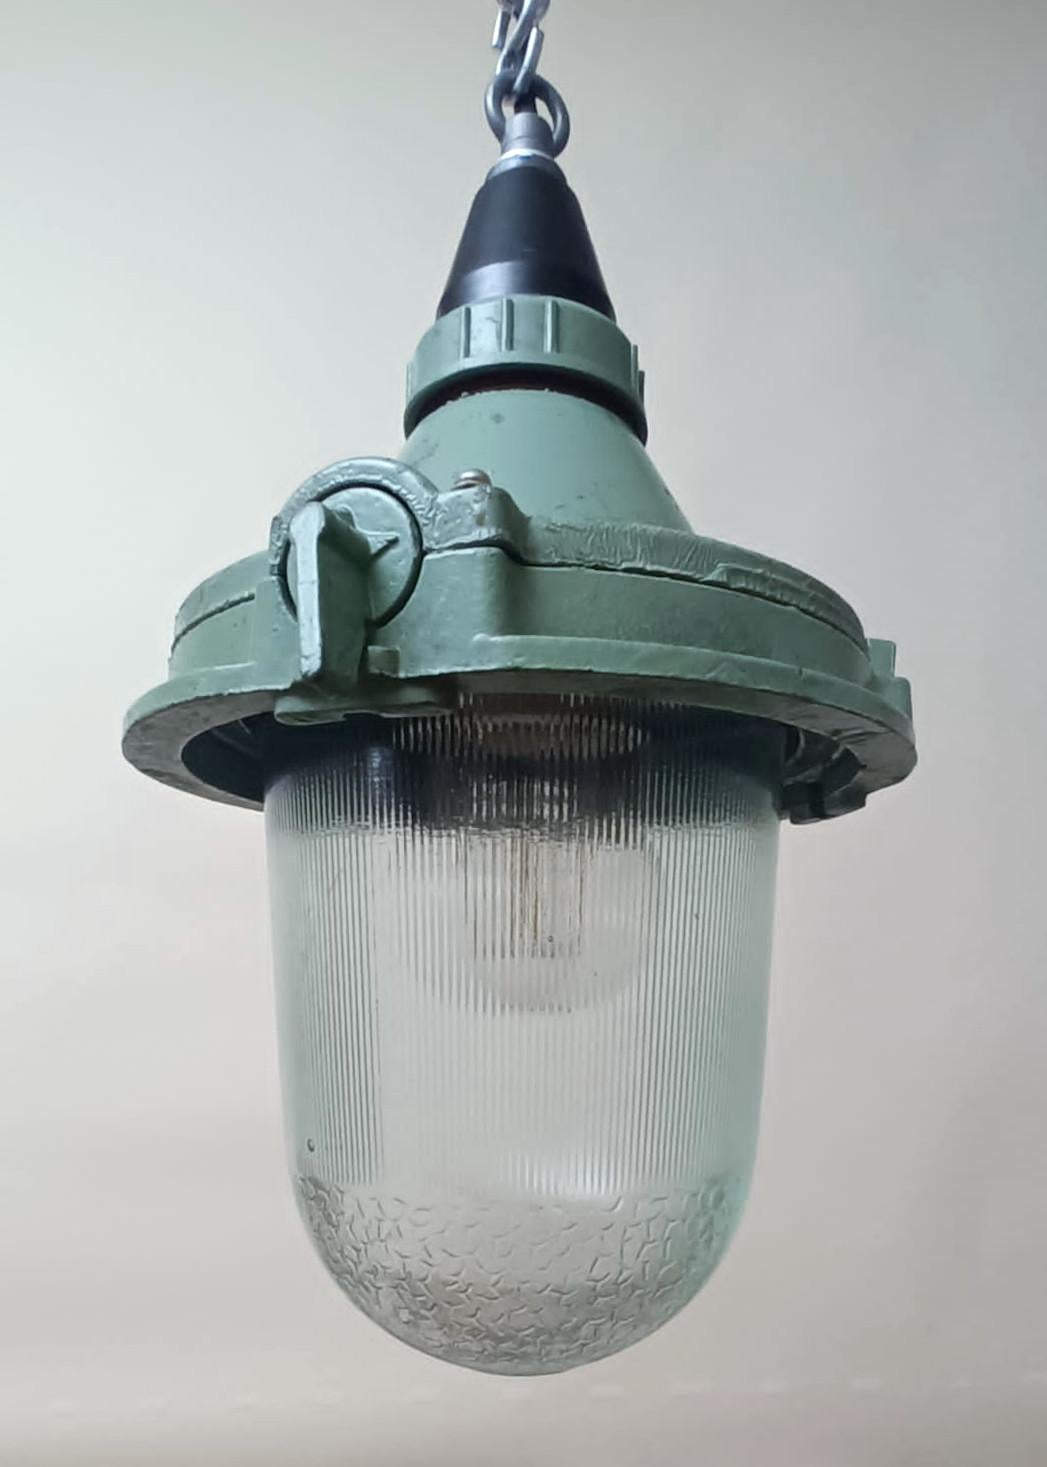 Vintage industrial lantern with cast aluminum body and glass shade / Made in the USSR circa 1980s
Measures: Diameter 9.5 inches, height 14 inches
1 light / E26 or E27 type / max 60W
2 available in stock in Italy, price listed is for each item
Order